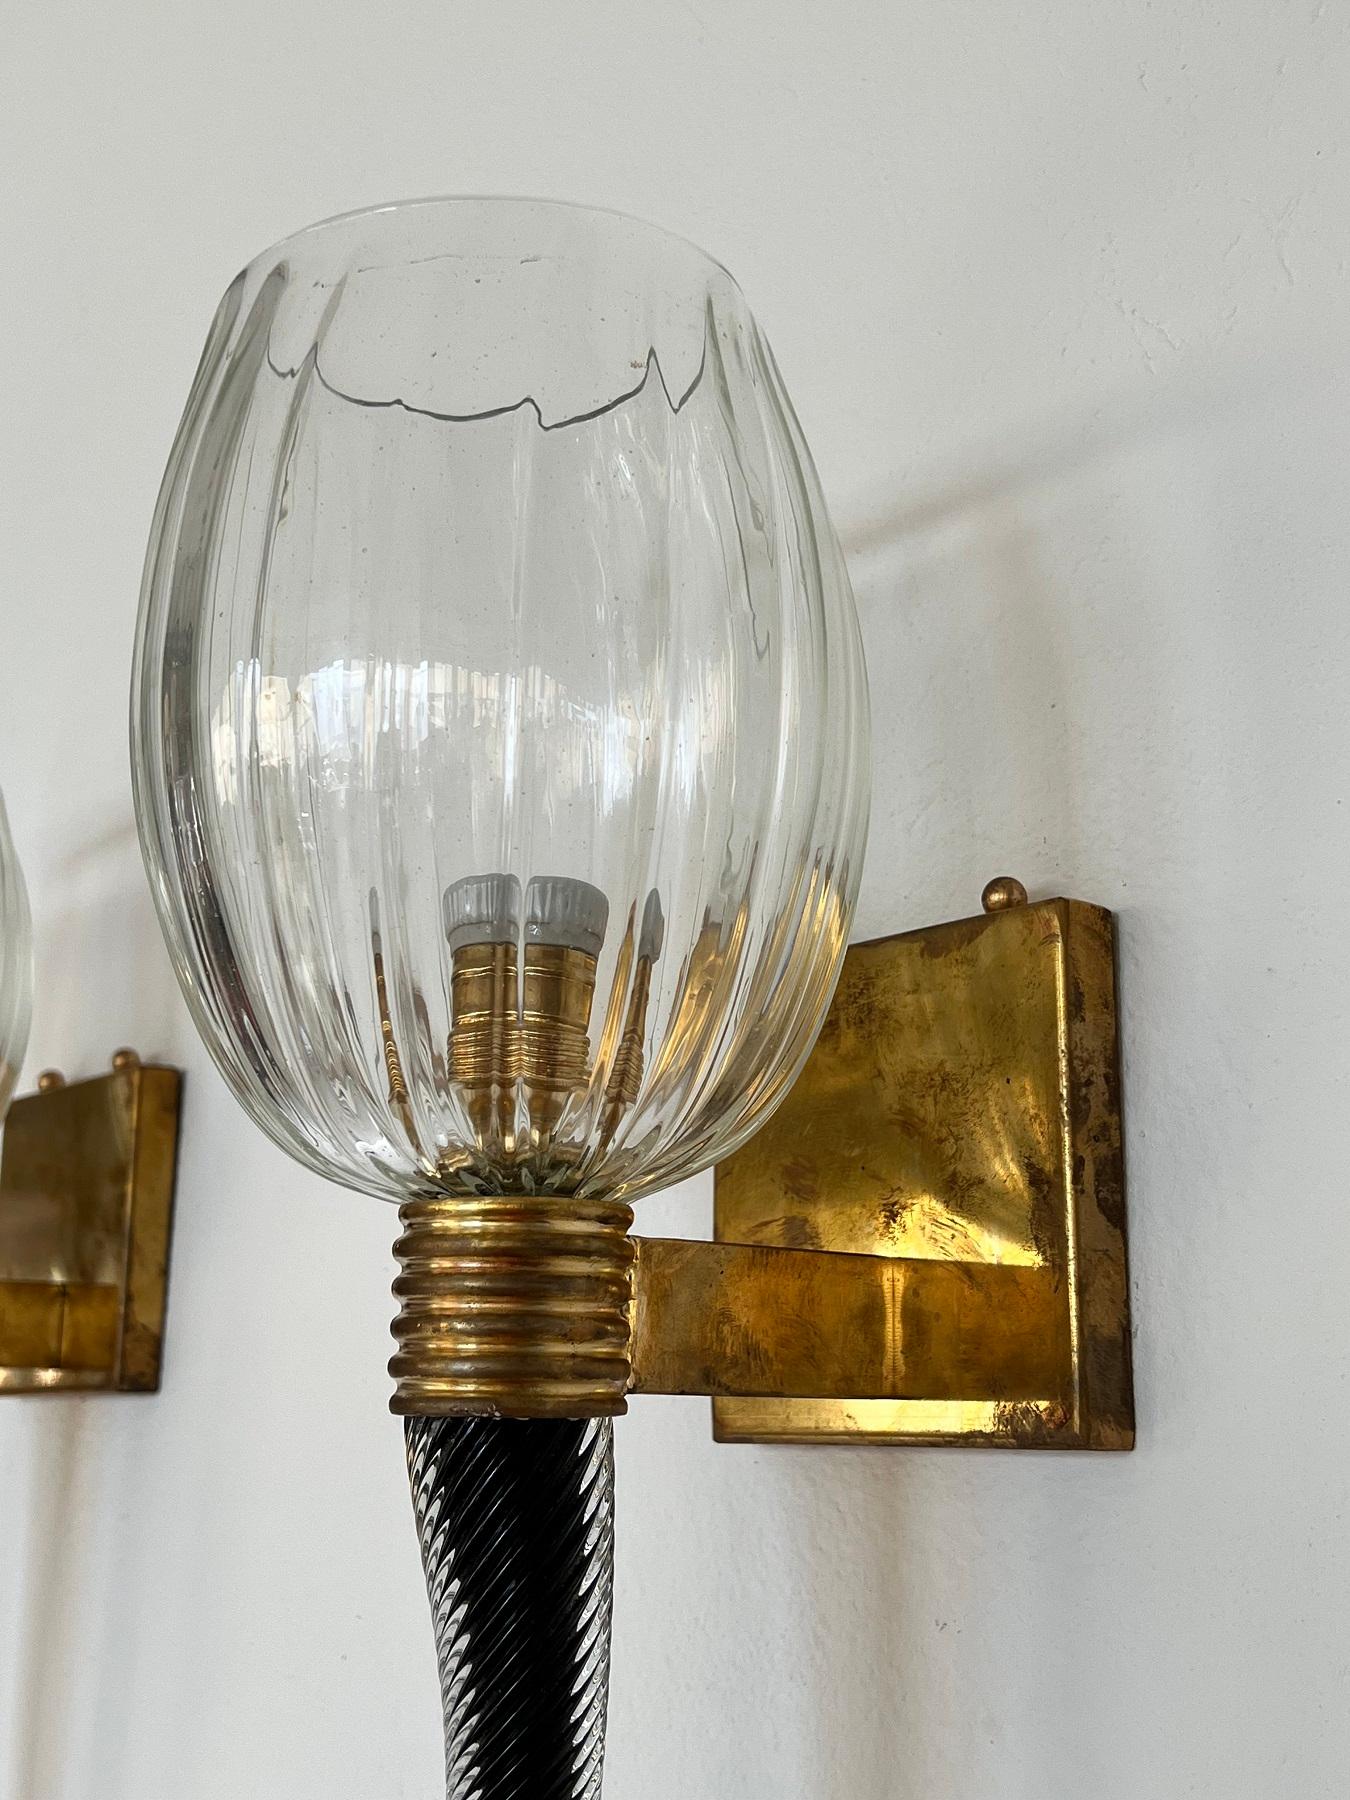 Italian Large Murano Glass Wall Lights or Sconces in Barovier Toso Style, 1990s For Sale 4